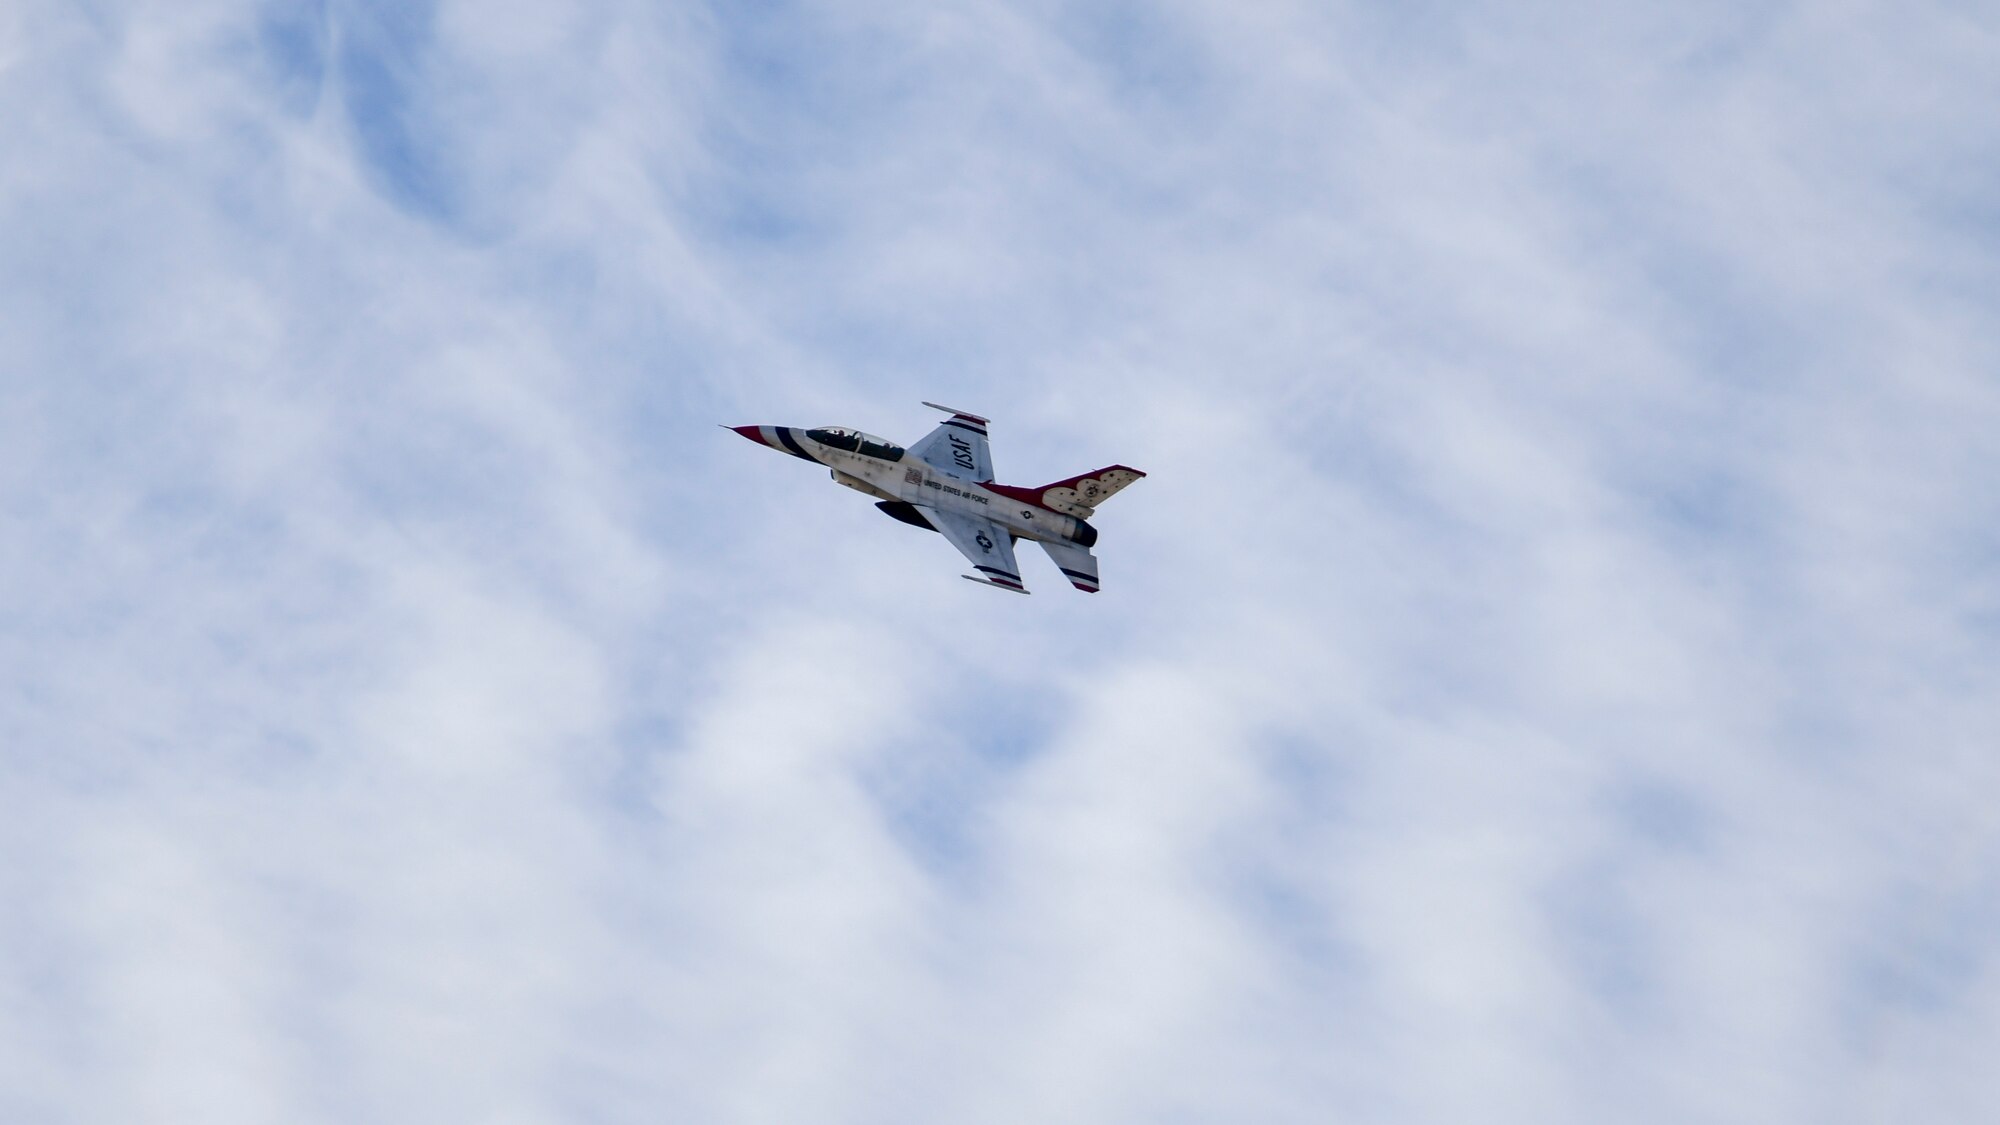 Air Force Thunderbird jet #8, flown by Maj. Jason Markzon, flies over Edwards Air Force Base, California, Jan. 16. Markzon, the advance pilot and narrator for the Thunderbirds Flight Demonstration Squadron, visited different base facilities at Edwards to conduct a site survey ahead of their performance at the 2020 Aerospace Valley Air Show, Oct. 10-11. (Air Force photo by Giancarlo Casem)